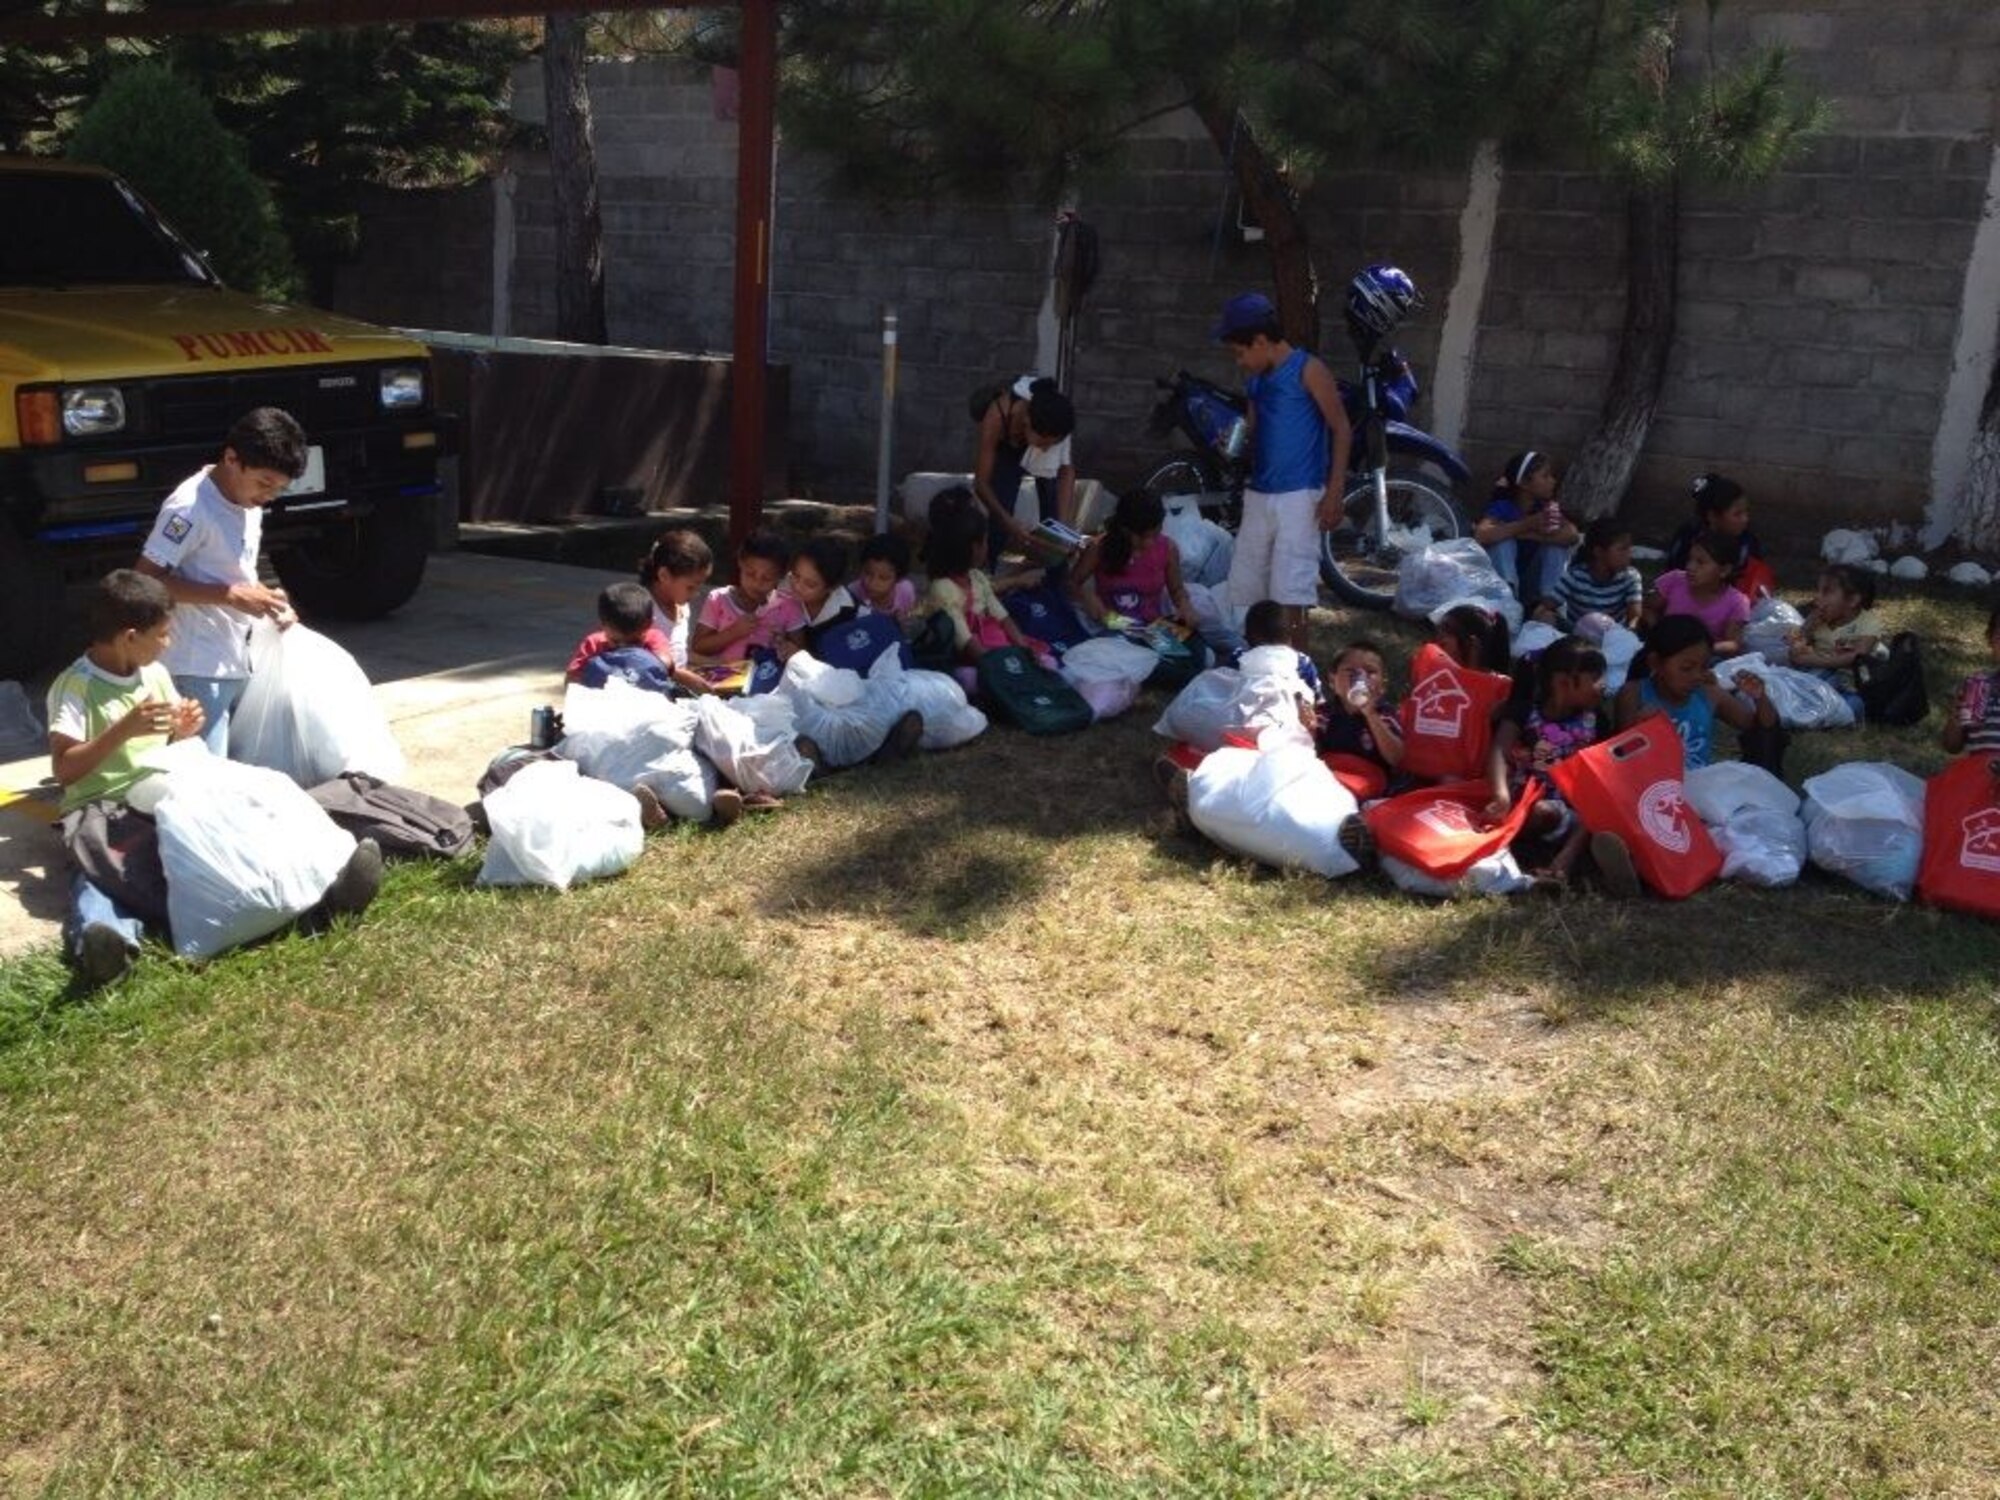 Children from the village of Mata de Patano, just outside of Comayagua, Honduras, receive clothes and backpacks that were donated by the 612th Air Base Squadron fire department, Joint Task Force-Bravo, clothes drive March 8, 2014.  The drive collected more than 275 sets of clothing and shoes that helped over 30 families.  (Courtesy photo)